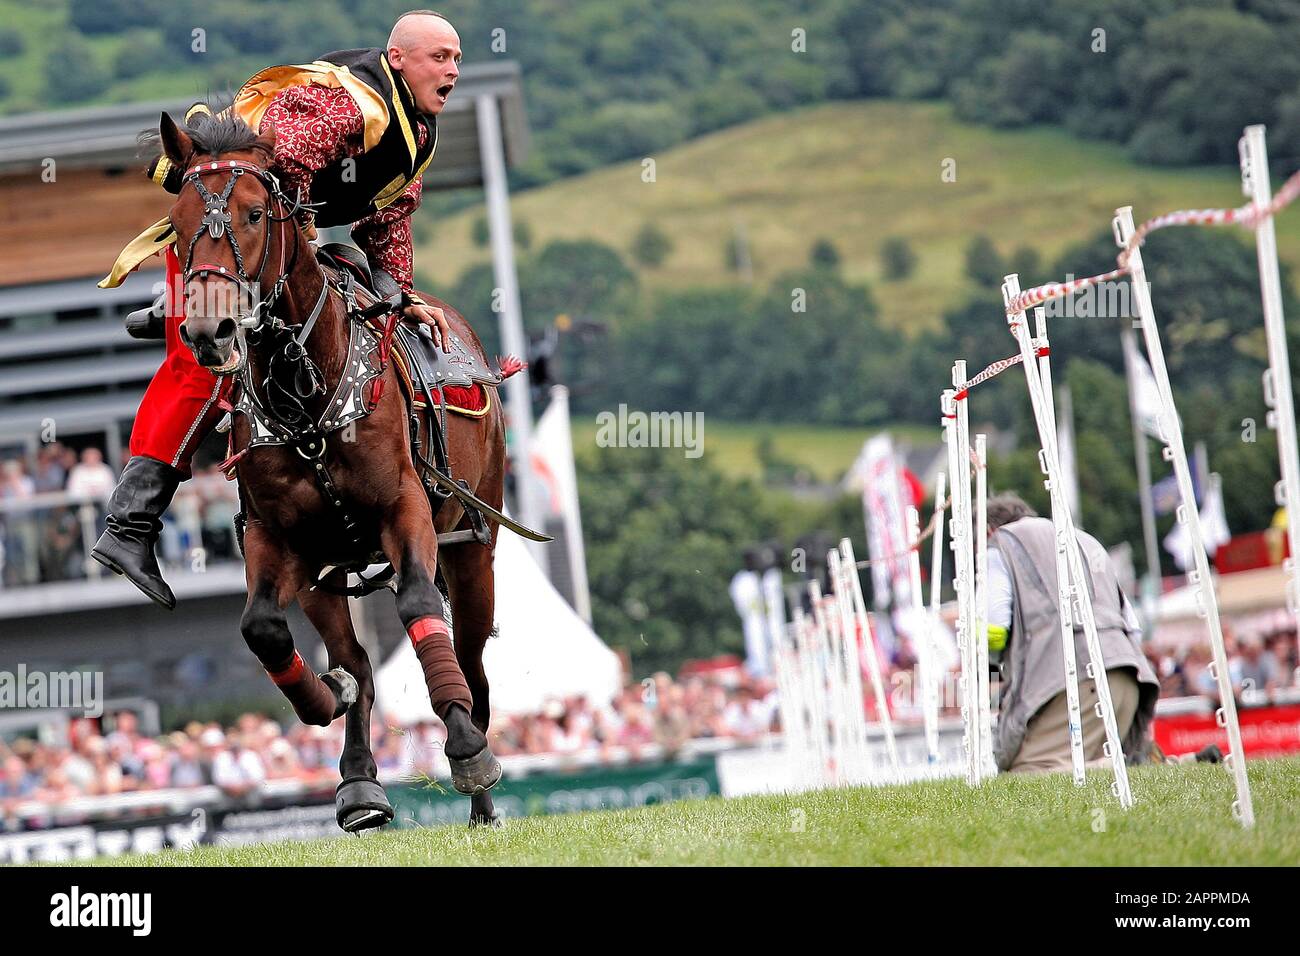 Llanelwedd, Wales, Royal Welsh Show, July 2012. Ukrainian cossack rides in the main ring at the Royal Welsh Show ©PRWPhotography Stock Photo